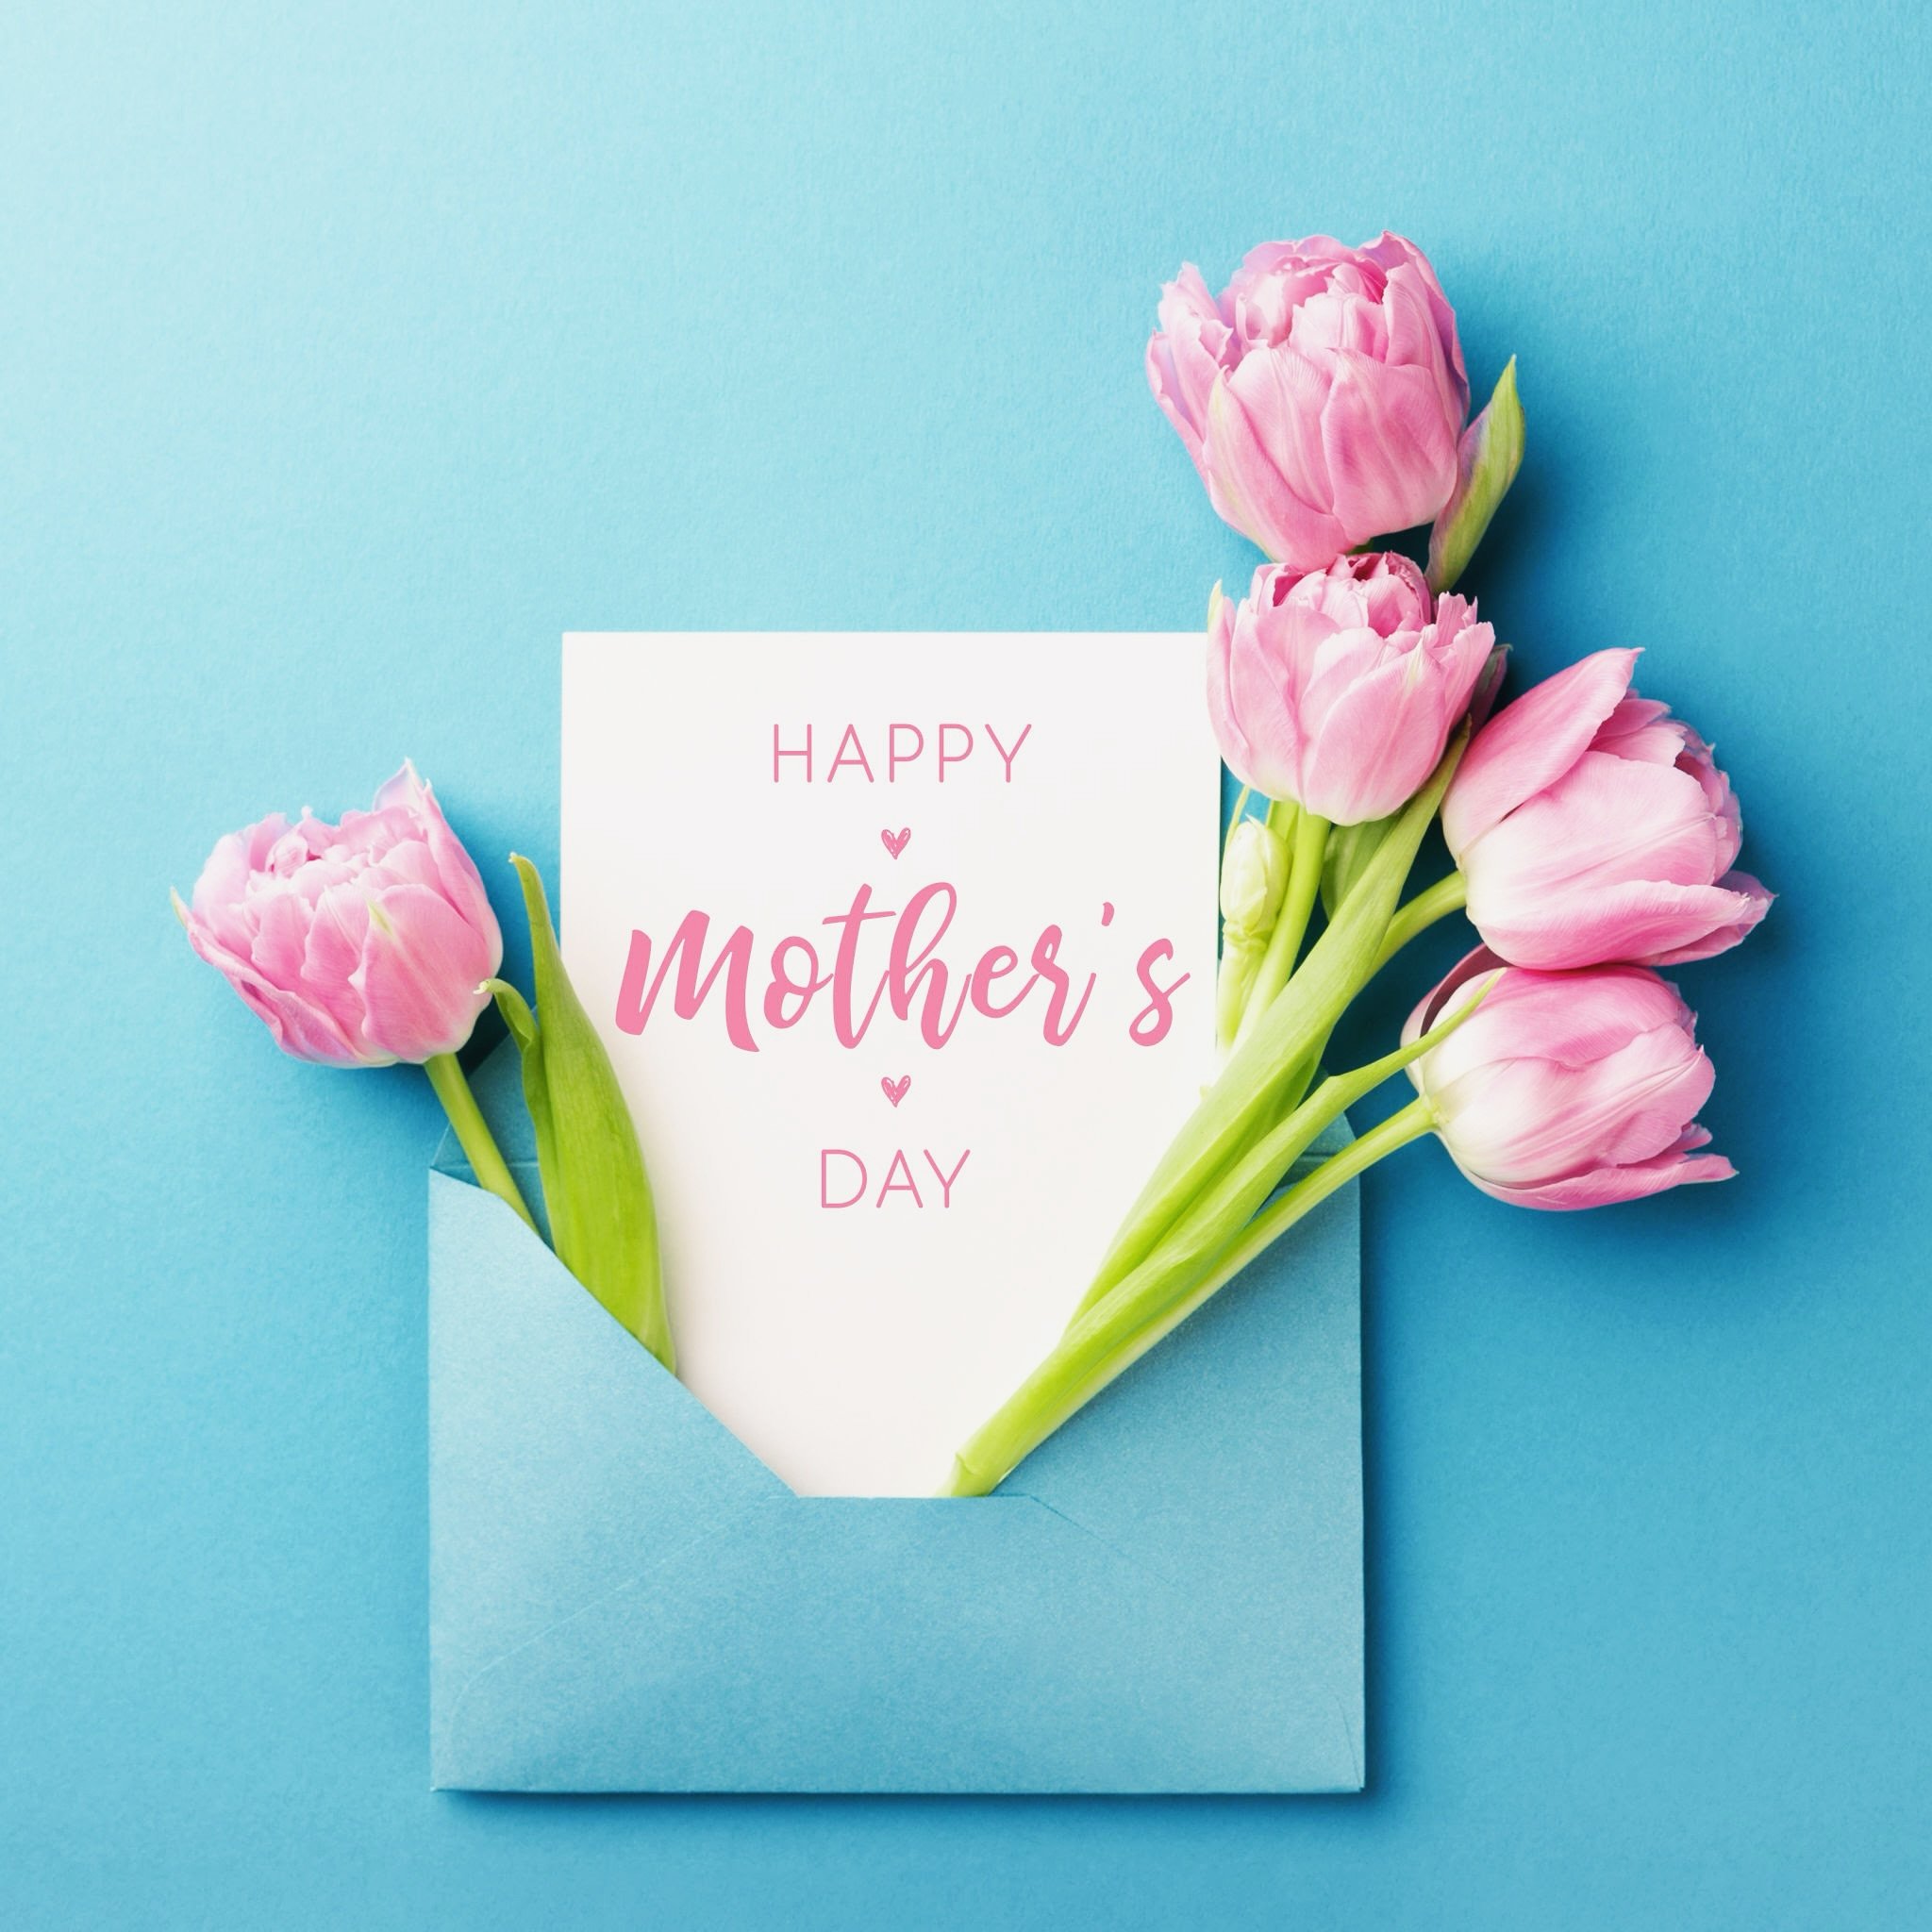 🌸✨ Celebrating Motherhood! ✨🌸

At work tonight, the topic of Mother&rsquo;s Day plans sparked some excitement! It got me thinking about the beautiful ways we show appreciation to the incredible mums in our lives. 💖 

For those with kids, what ritu